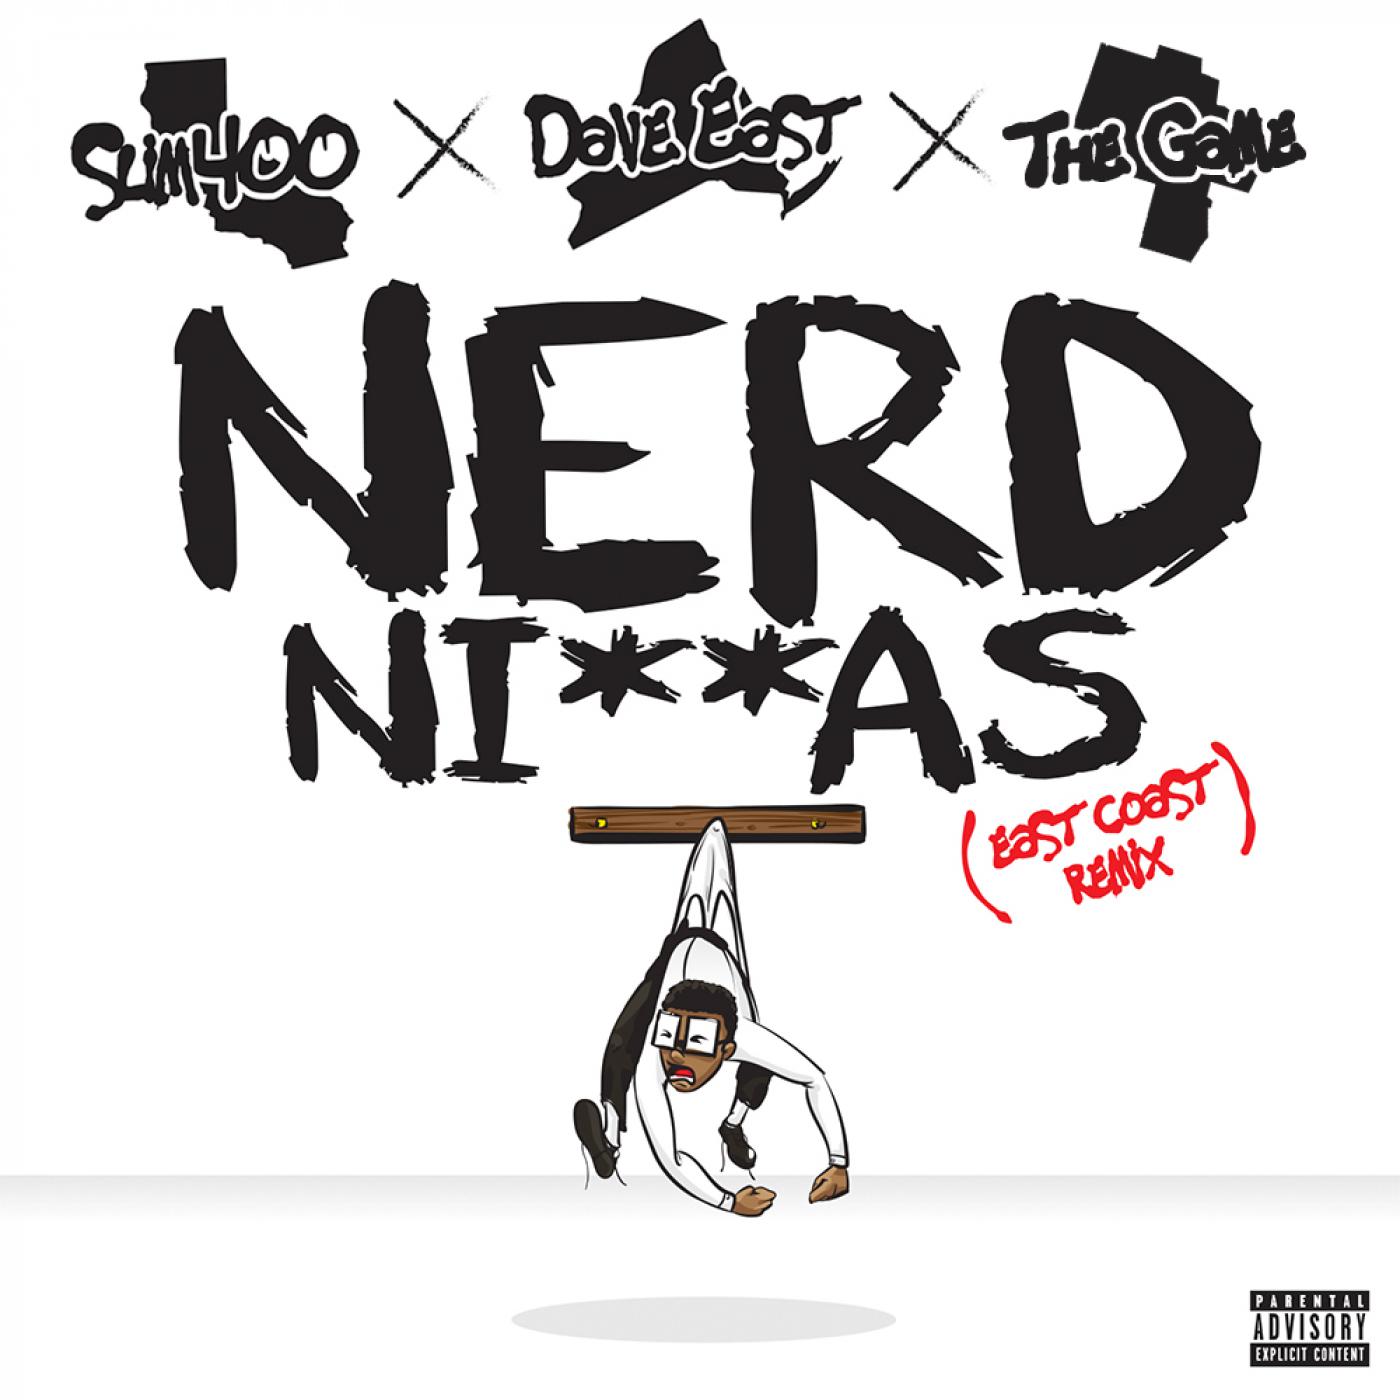 Nerd ****** Feat. Dave East, The Game